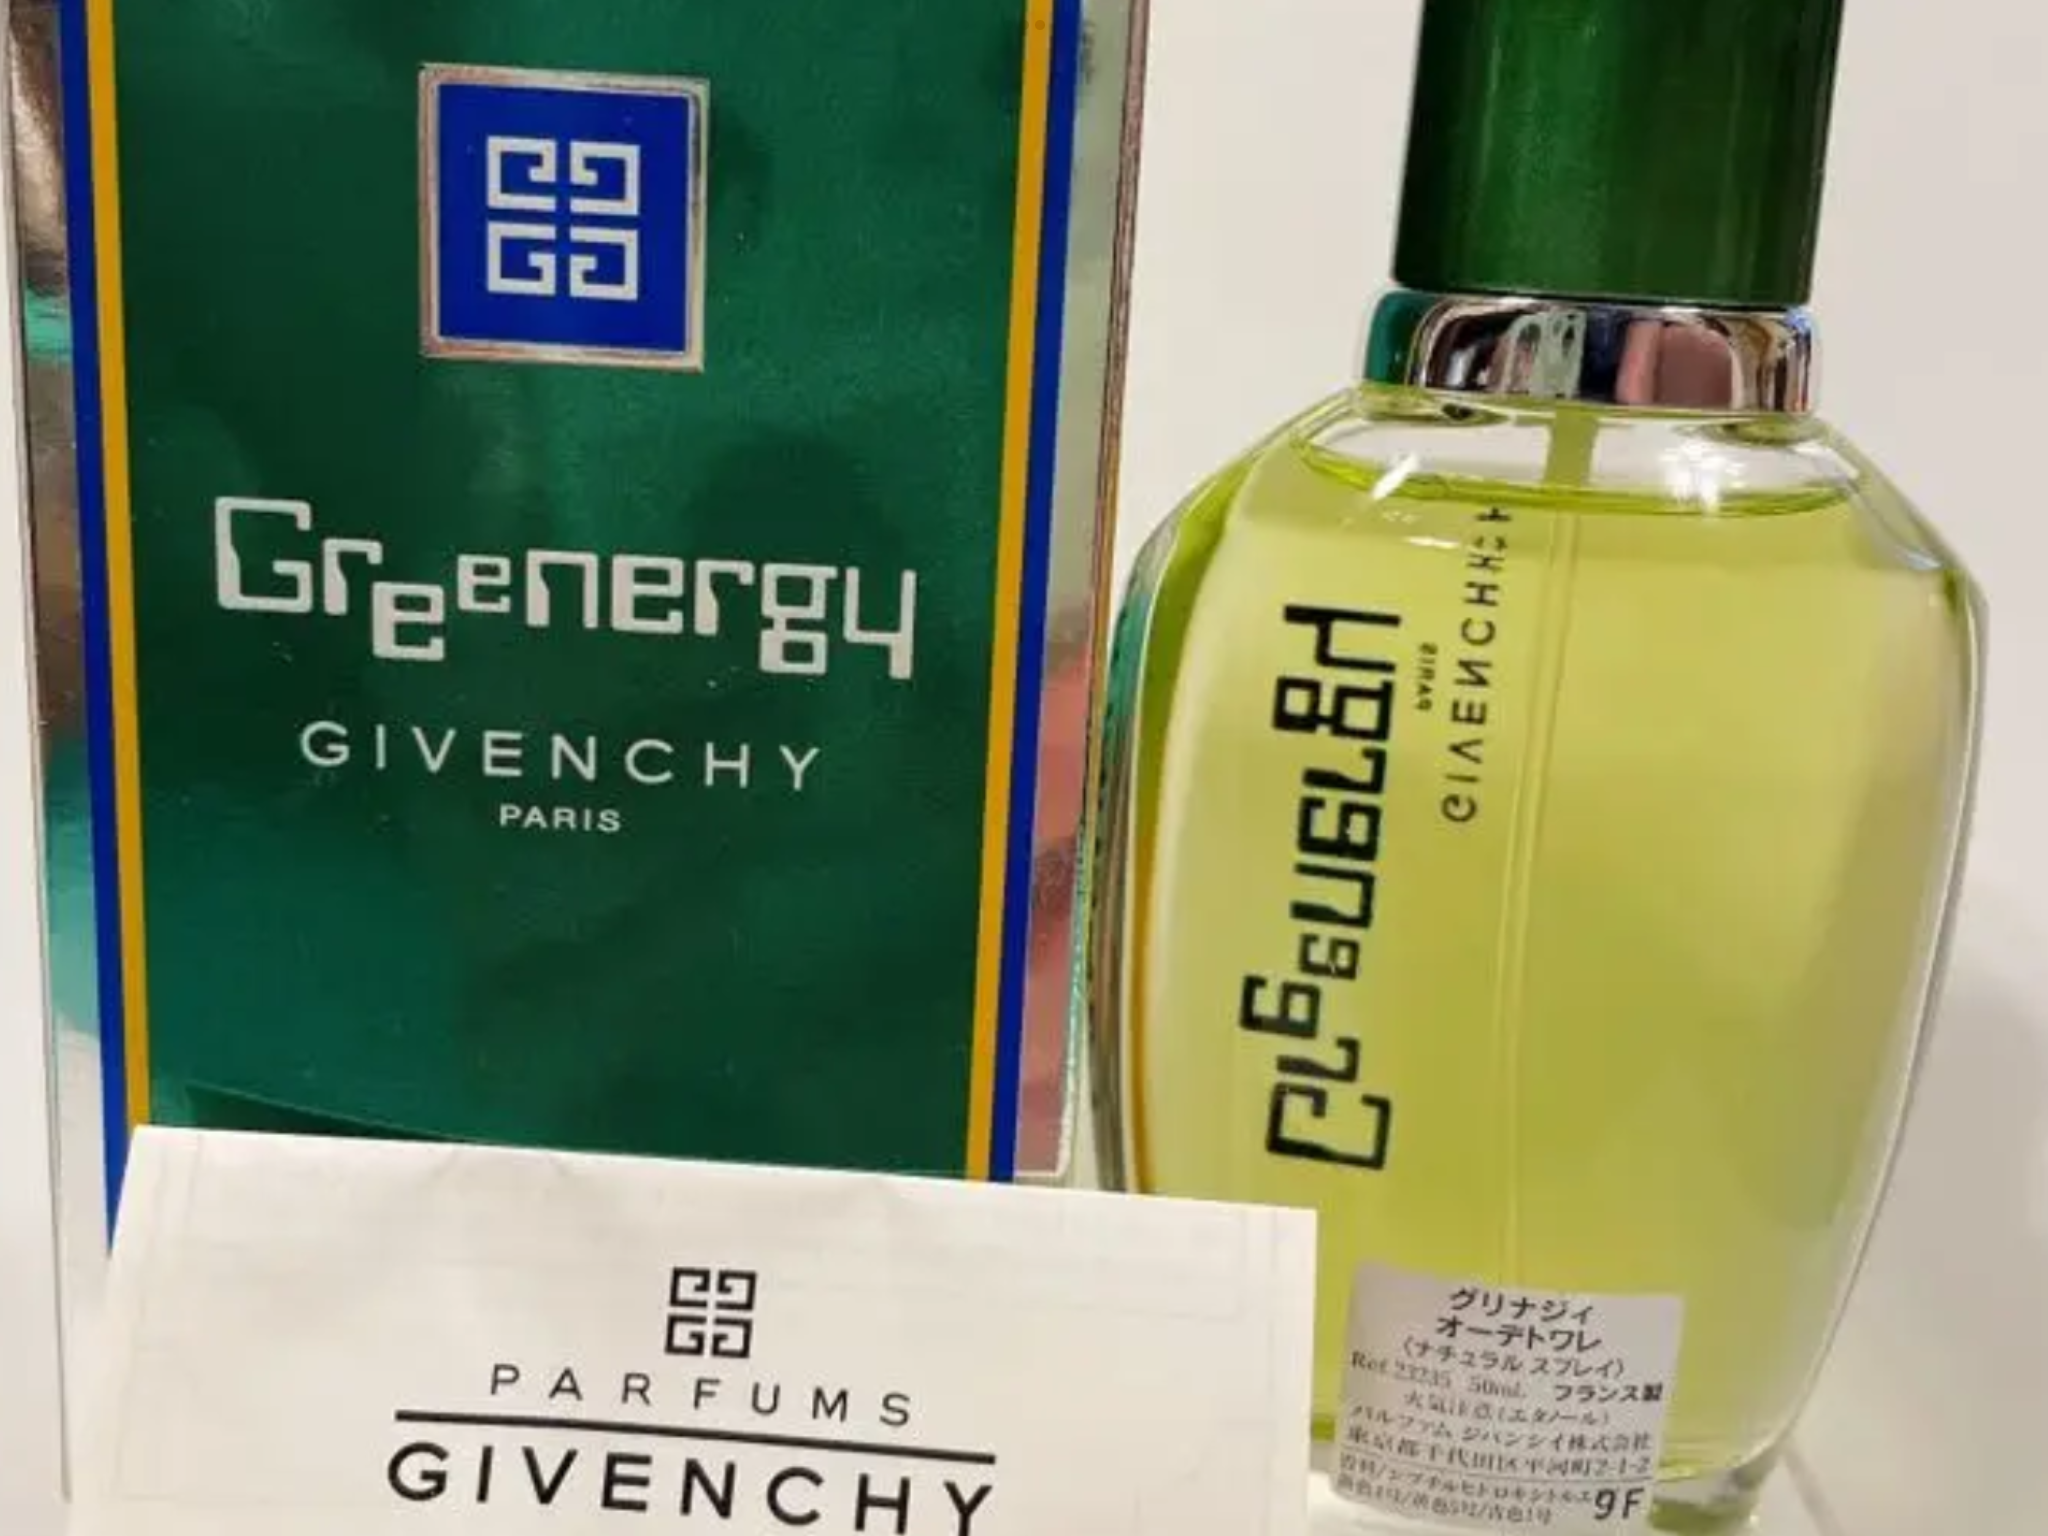 Greenergy Givenchy edt 50 ml. Rare, vintage, first edition. Sealed